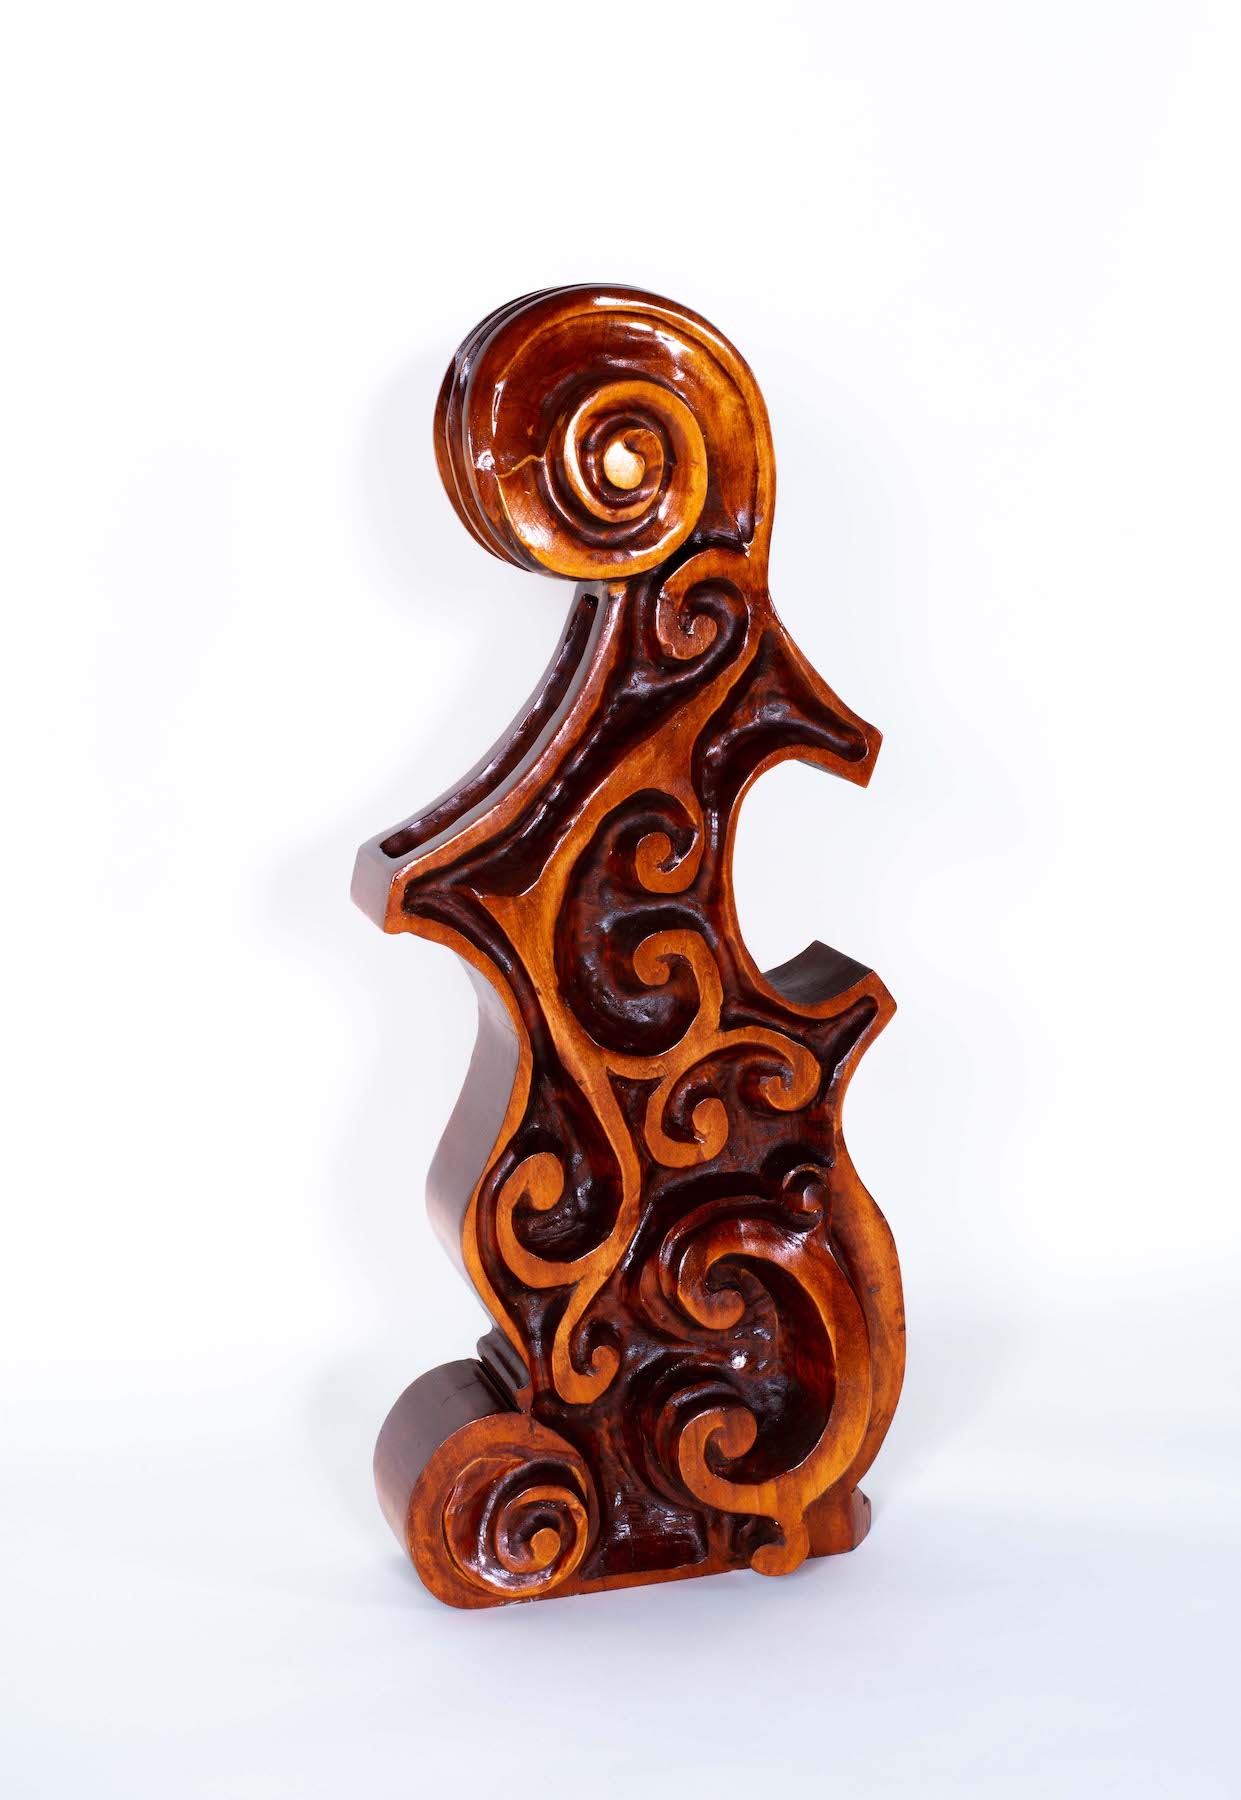 wooden work with swirling designs carved into it